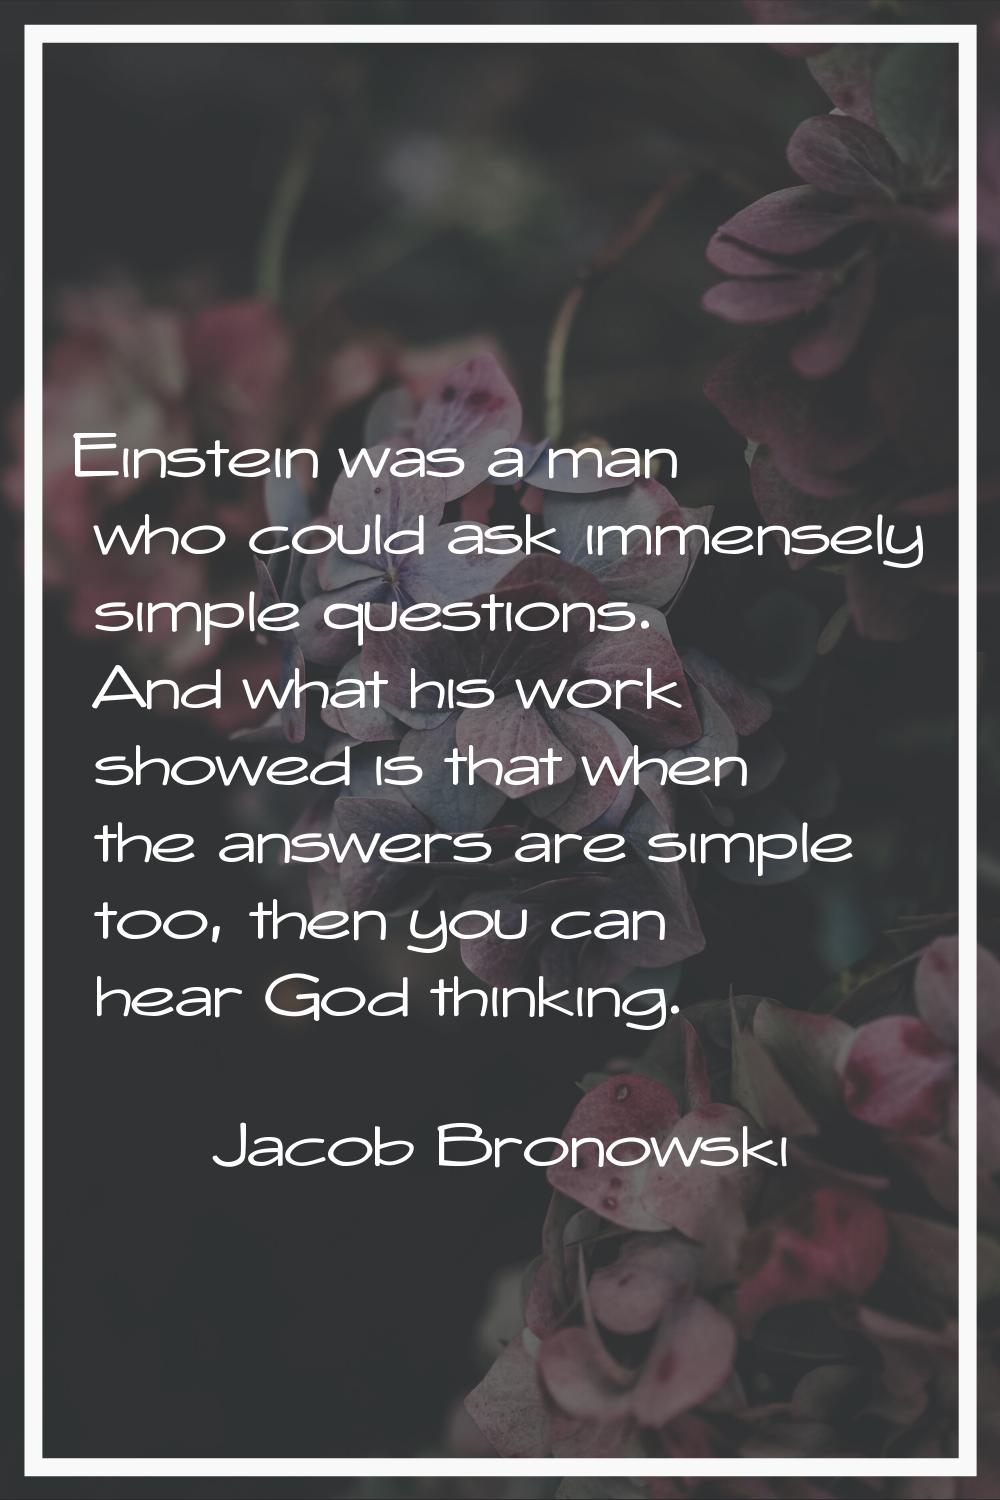 Einstein was a man who could ask immensely simple questions. And what his work showed is that when 